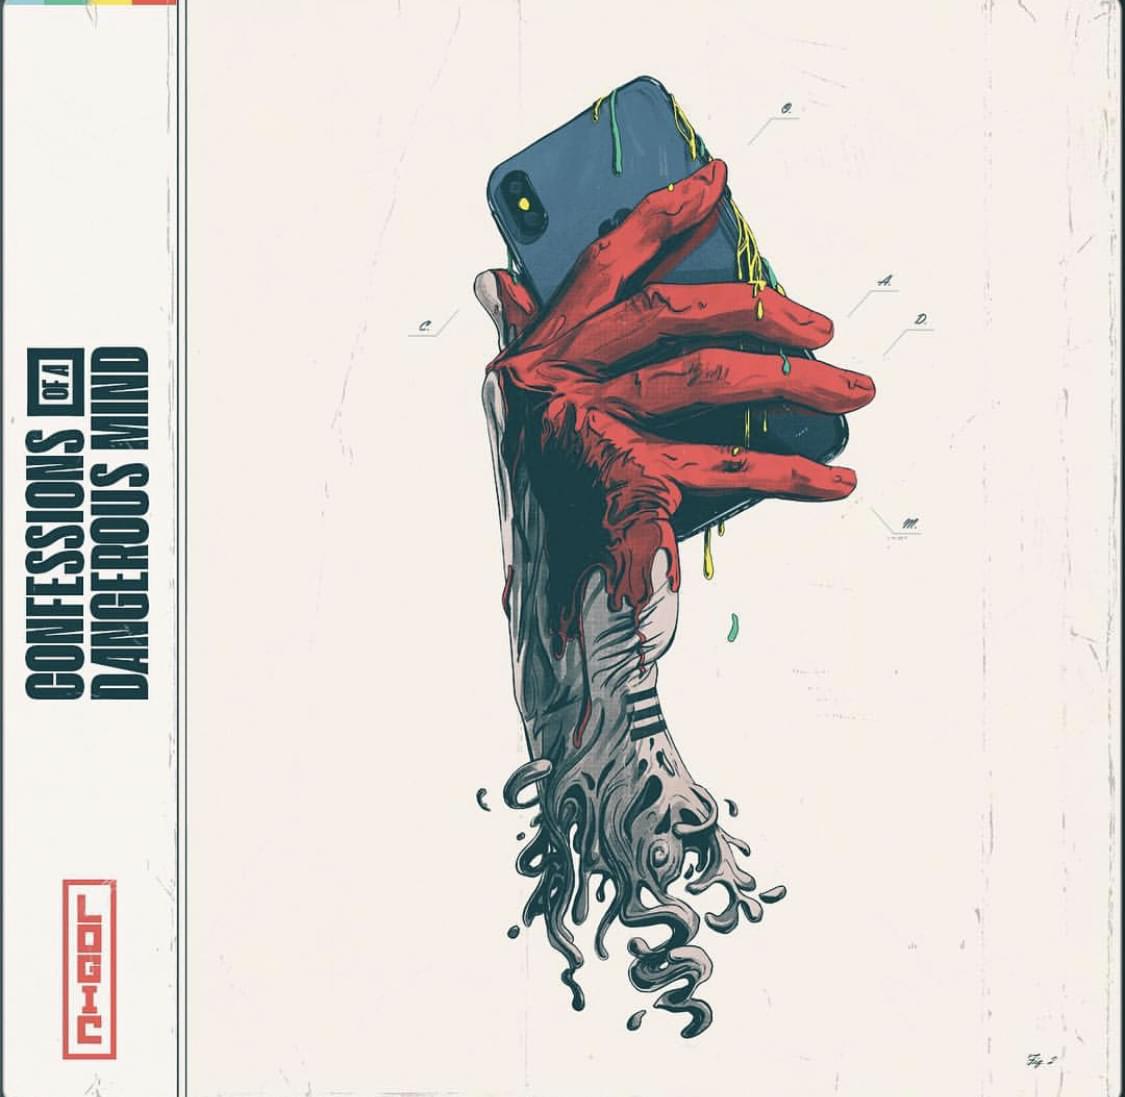 Logic Releases New Single “Confessions Of A Dangerous Mind” + Visuals [LISTEN]